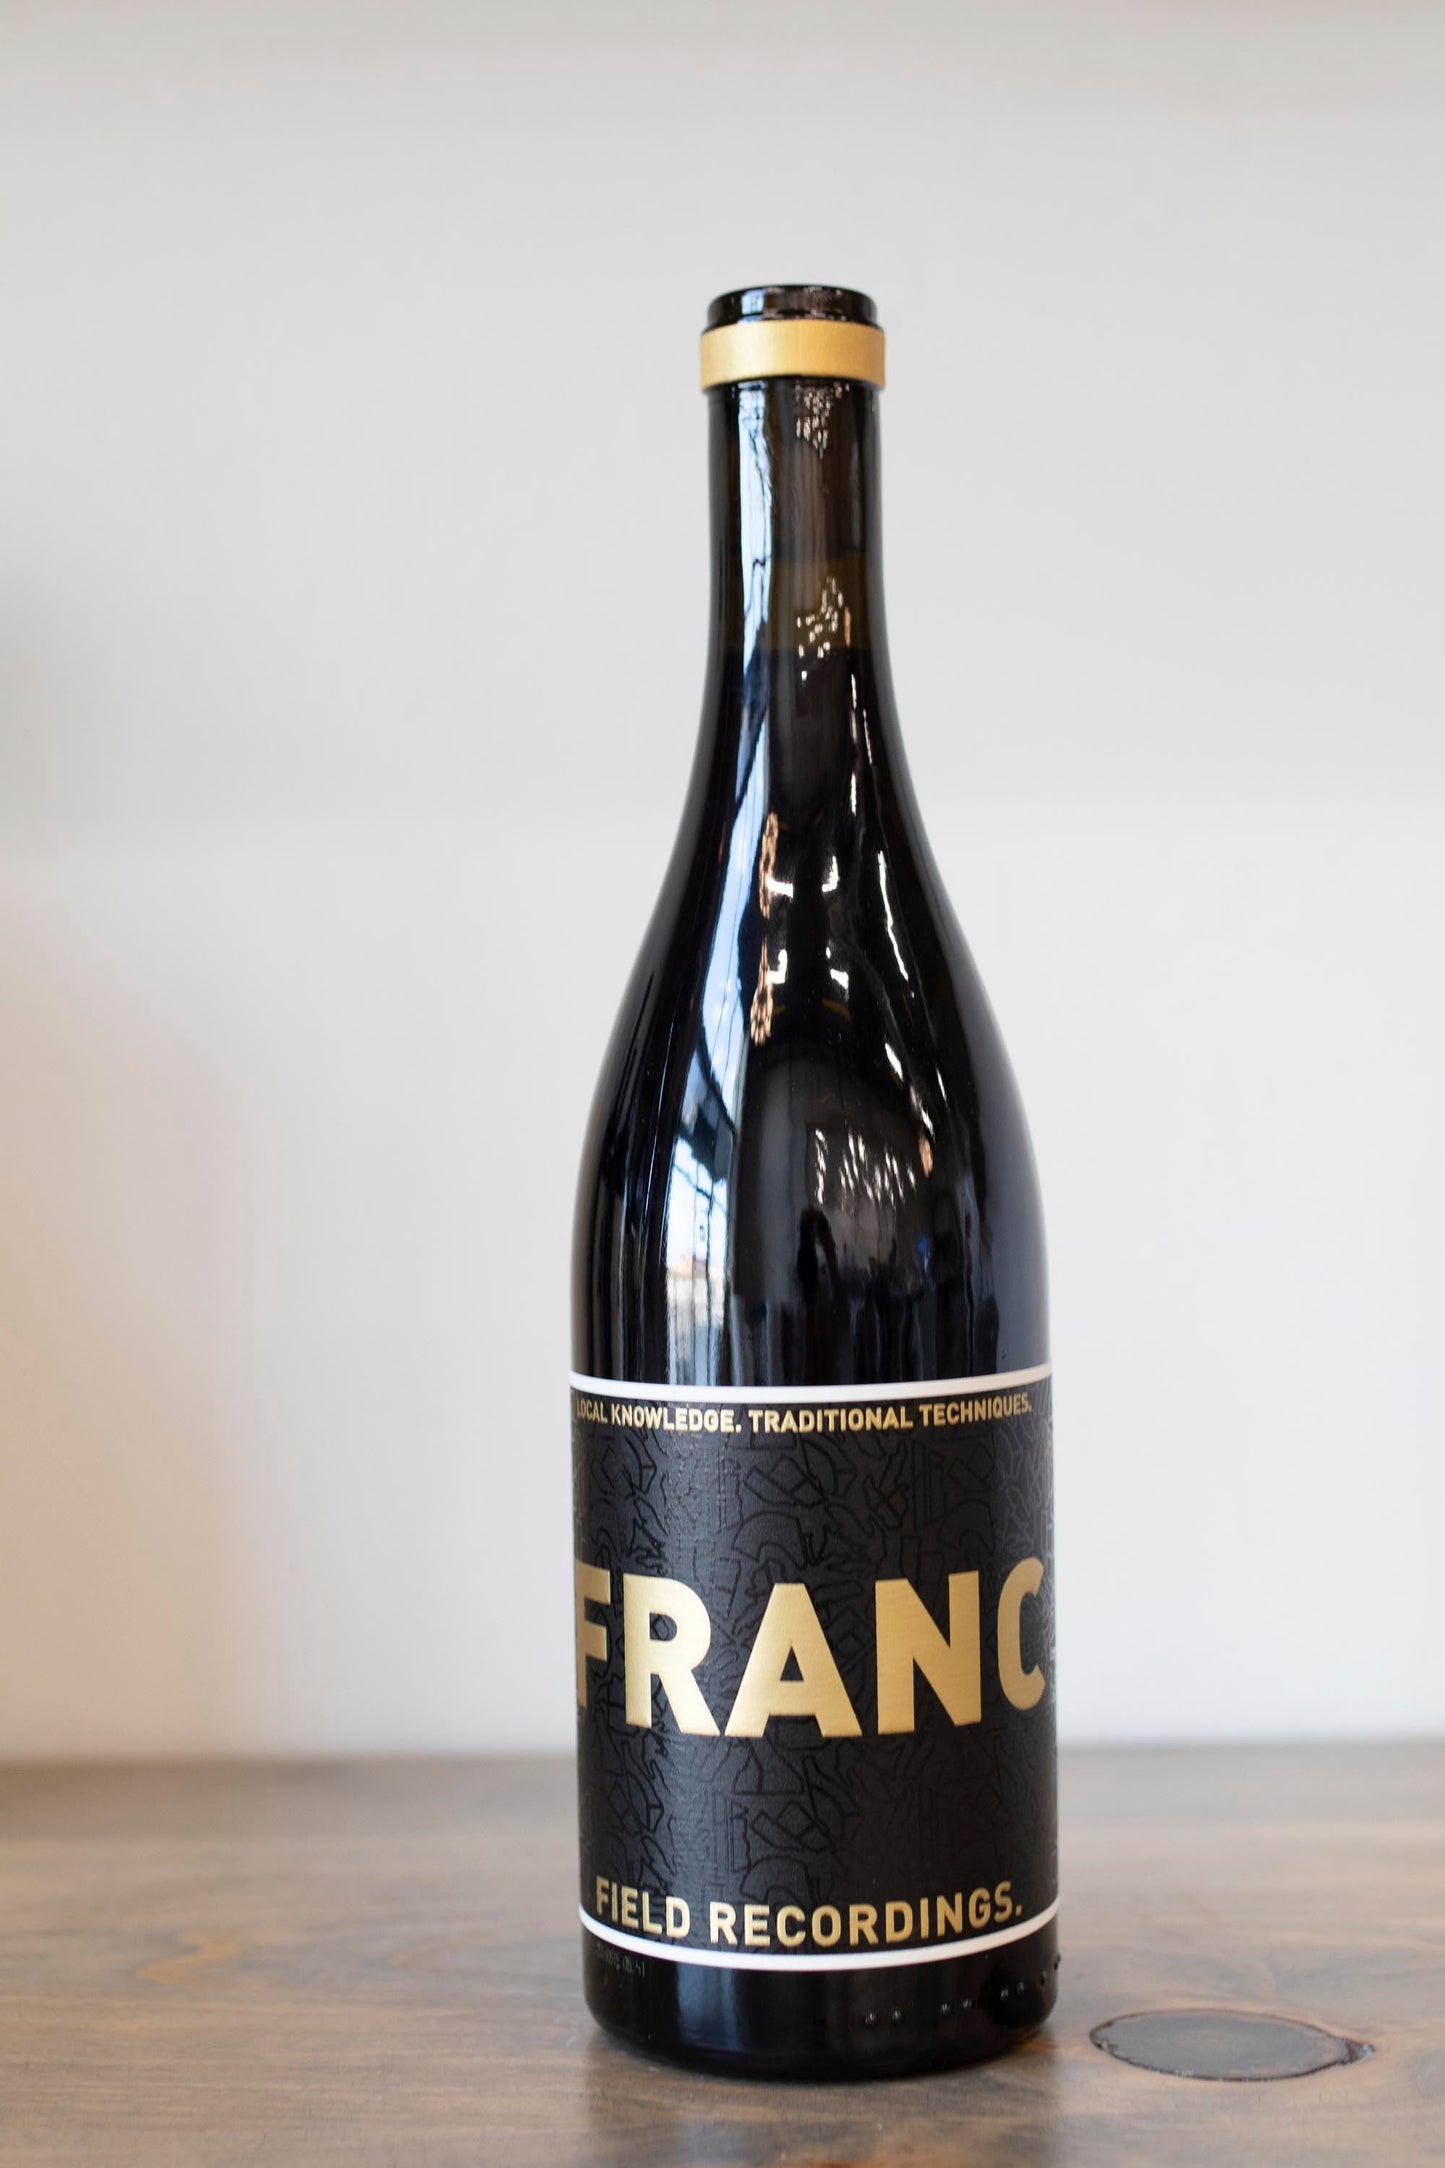 Bottle of Field Recordings Cabernet Franc found at Vine & Board in 3809 NW 166th St Suite 1, Edmond, OK 73012